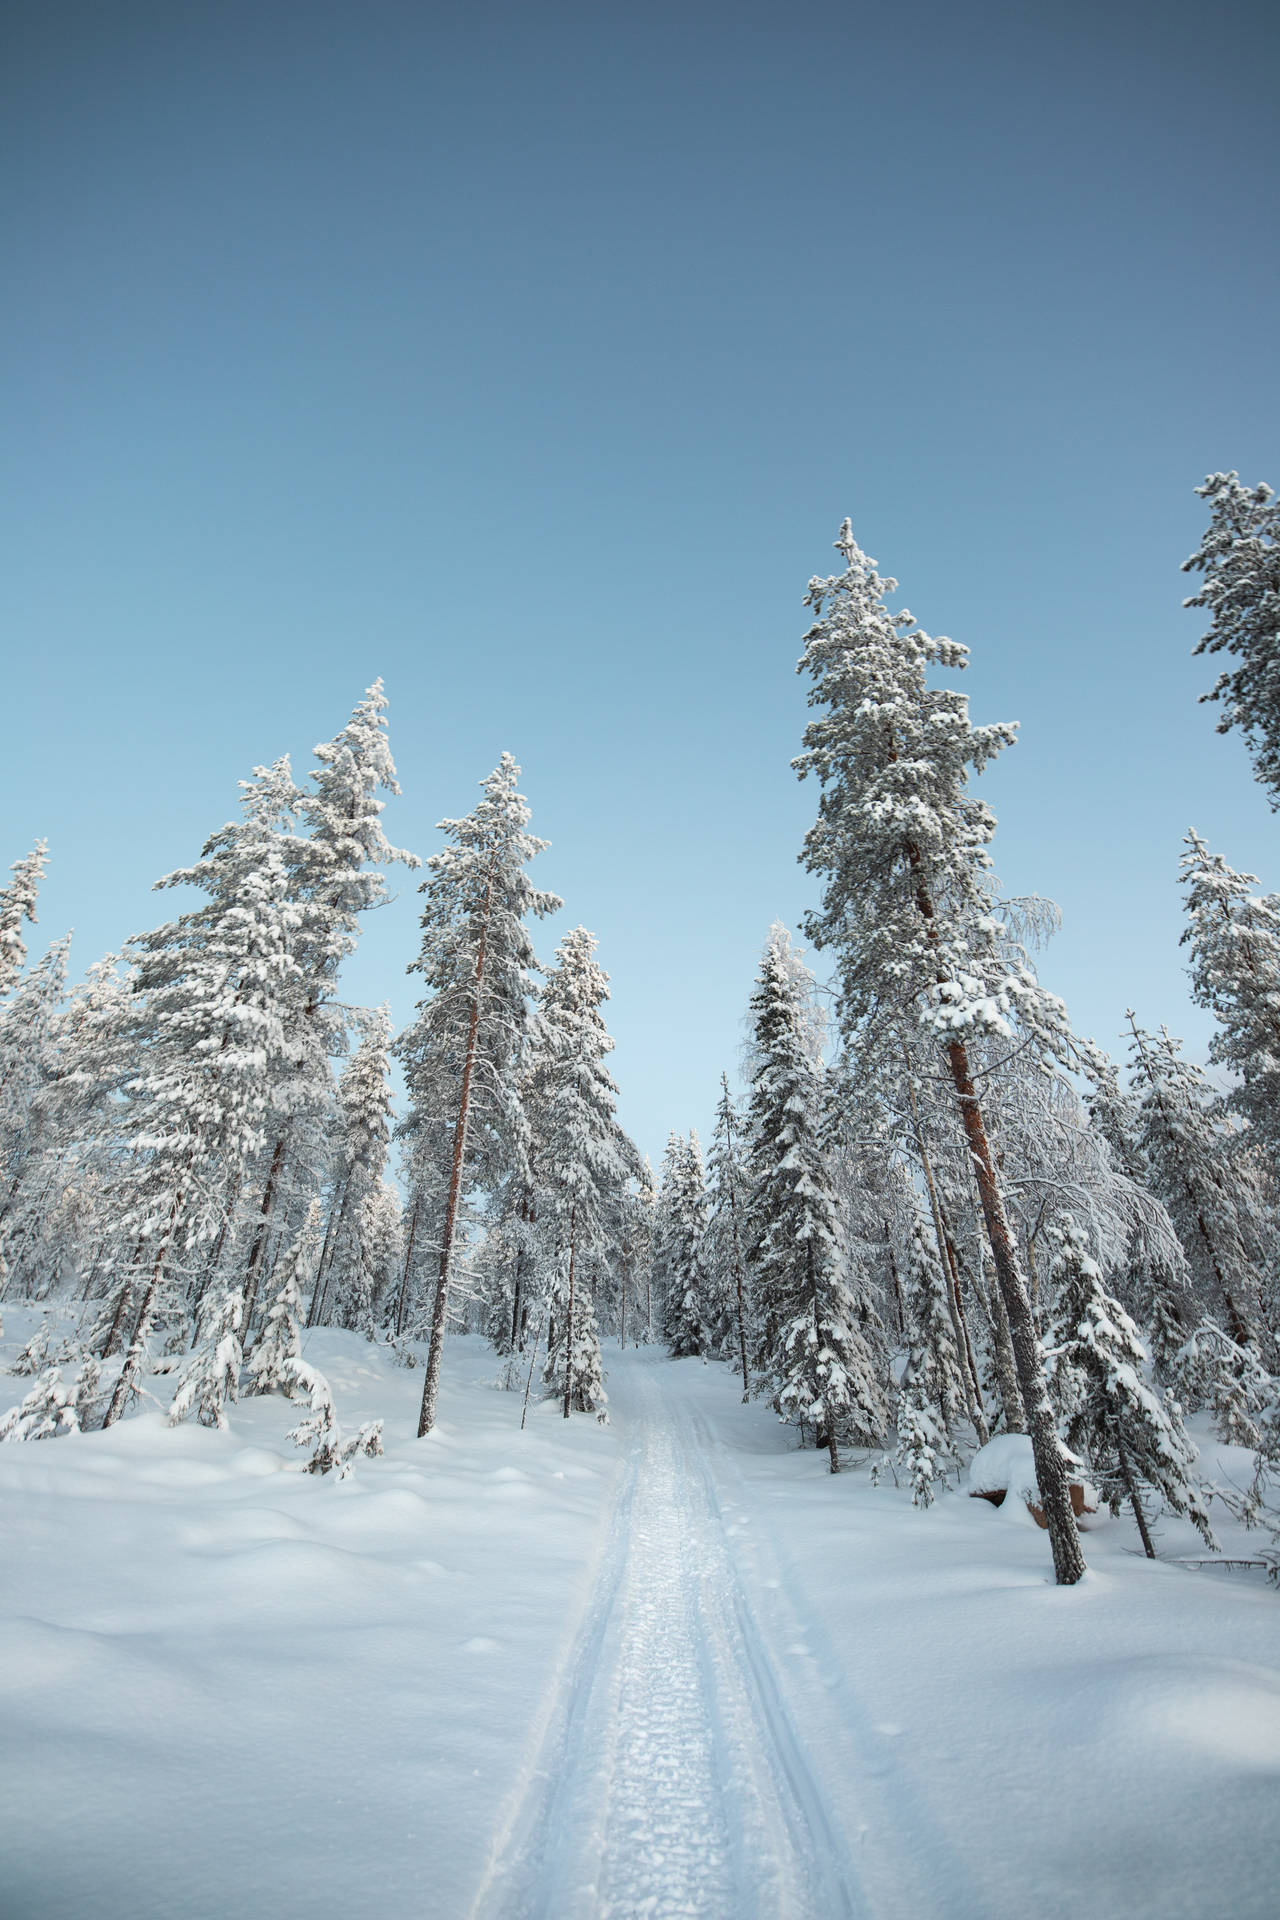 Snowy Pine Trees In Nordic Forest Wallpaper